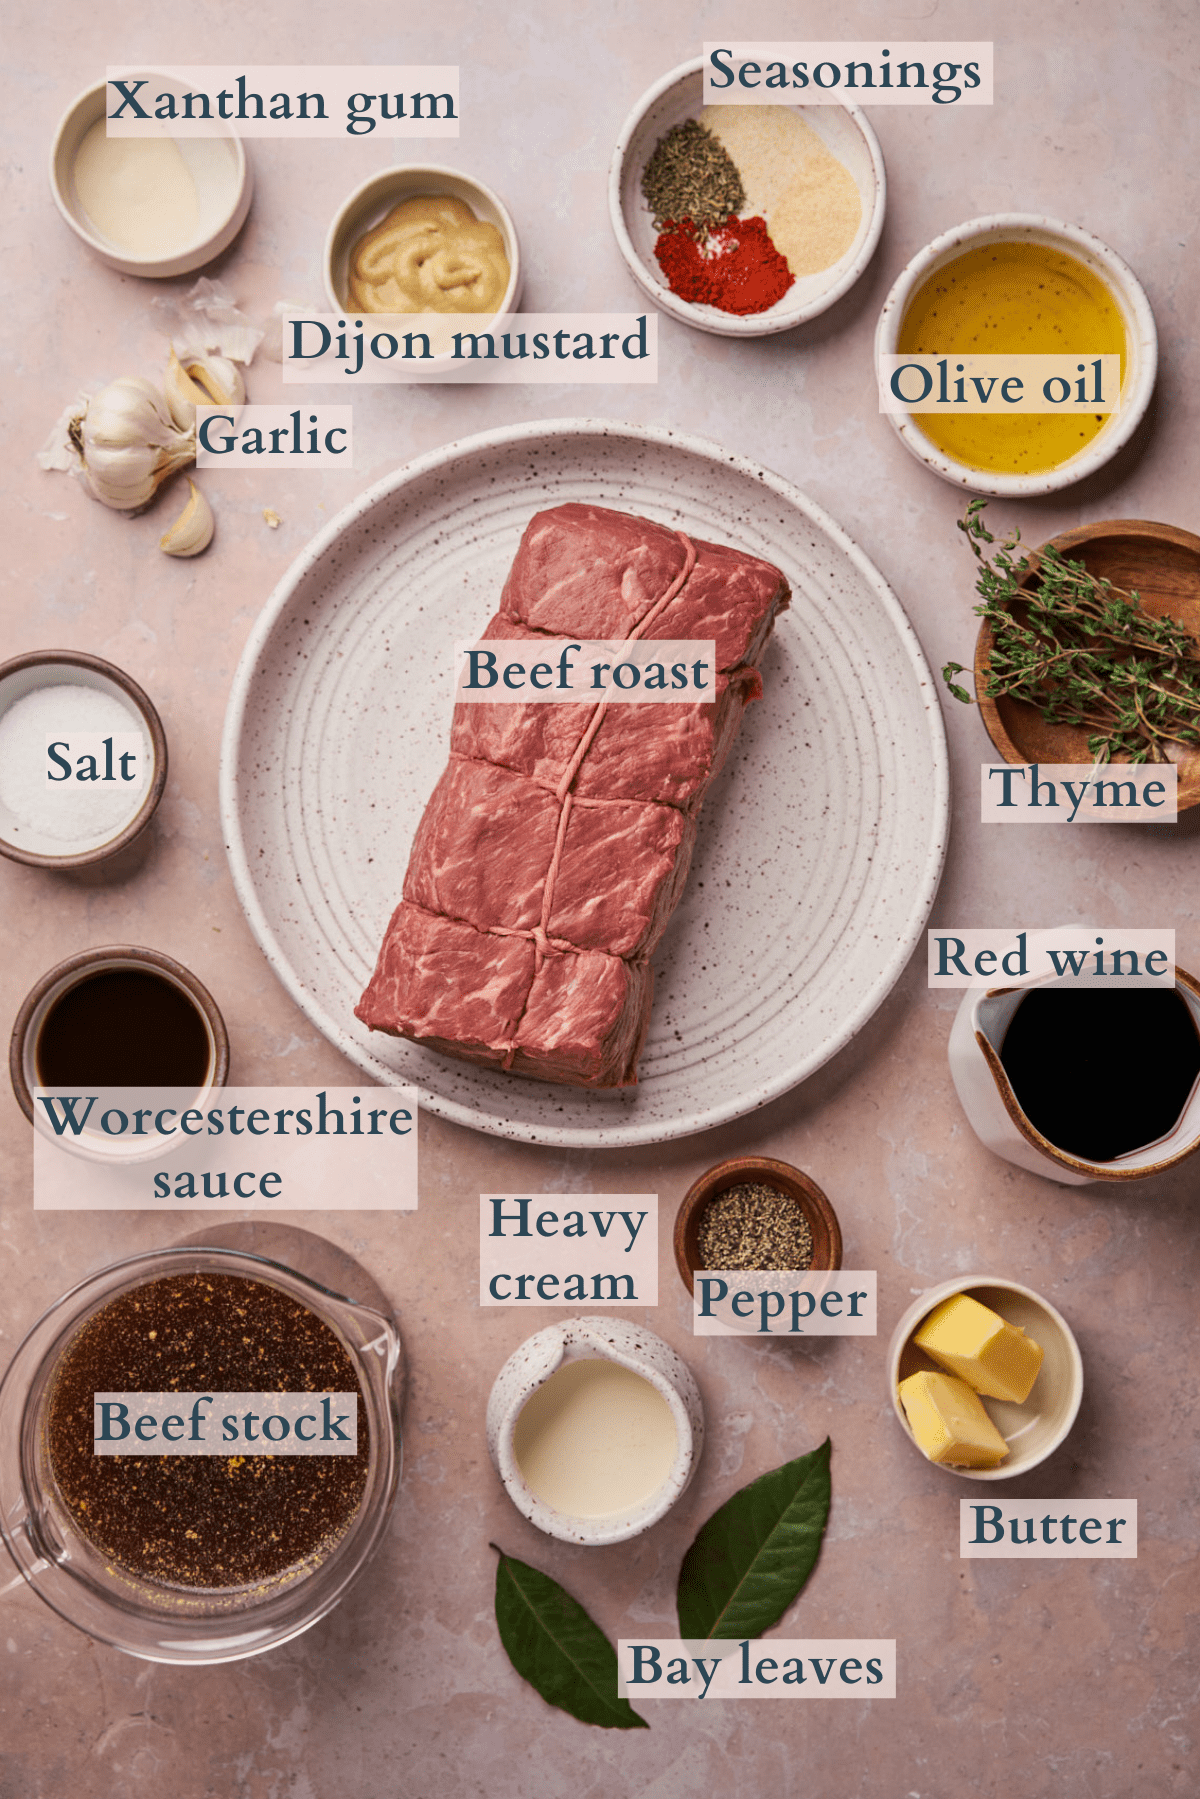 roast beef with gravy ingredients, with beef roast, dijon mustard, garlic, bay leaves, heavy cream, butter, beef stock, red wine, black pepper, salt, Worcestershire sauce, seasonings, olive oil, thyme, and Xanthan gum. 